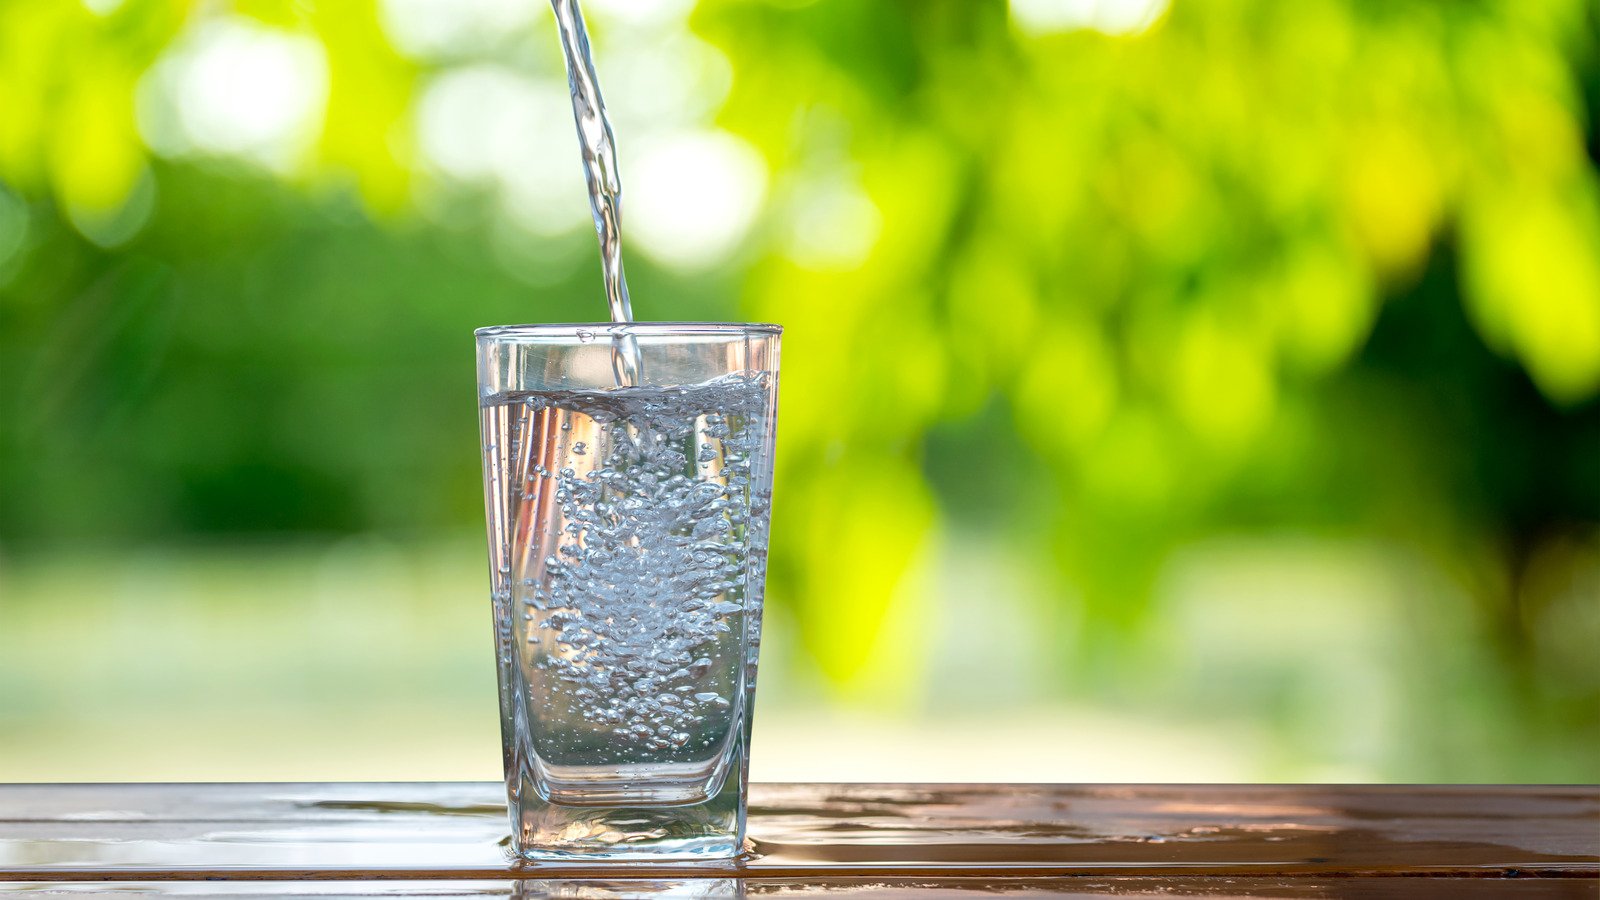 Heart Failure Study Gives You Another Reason To Drink More Water